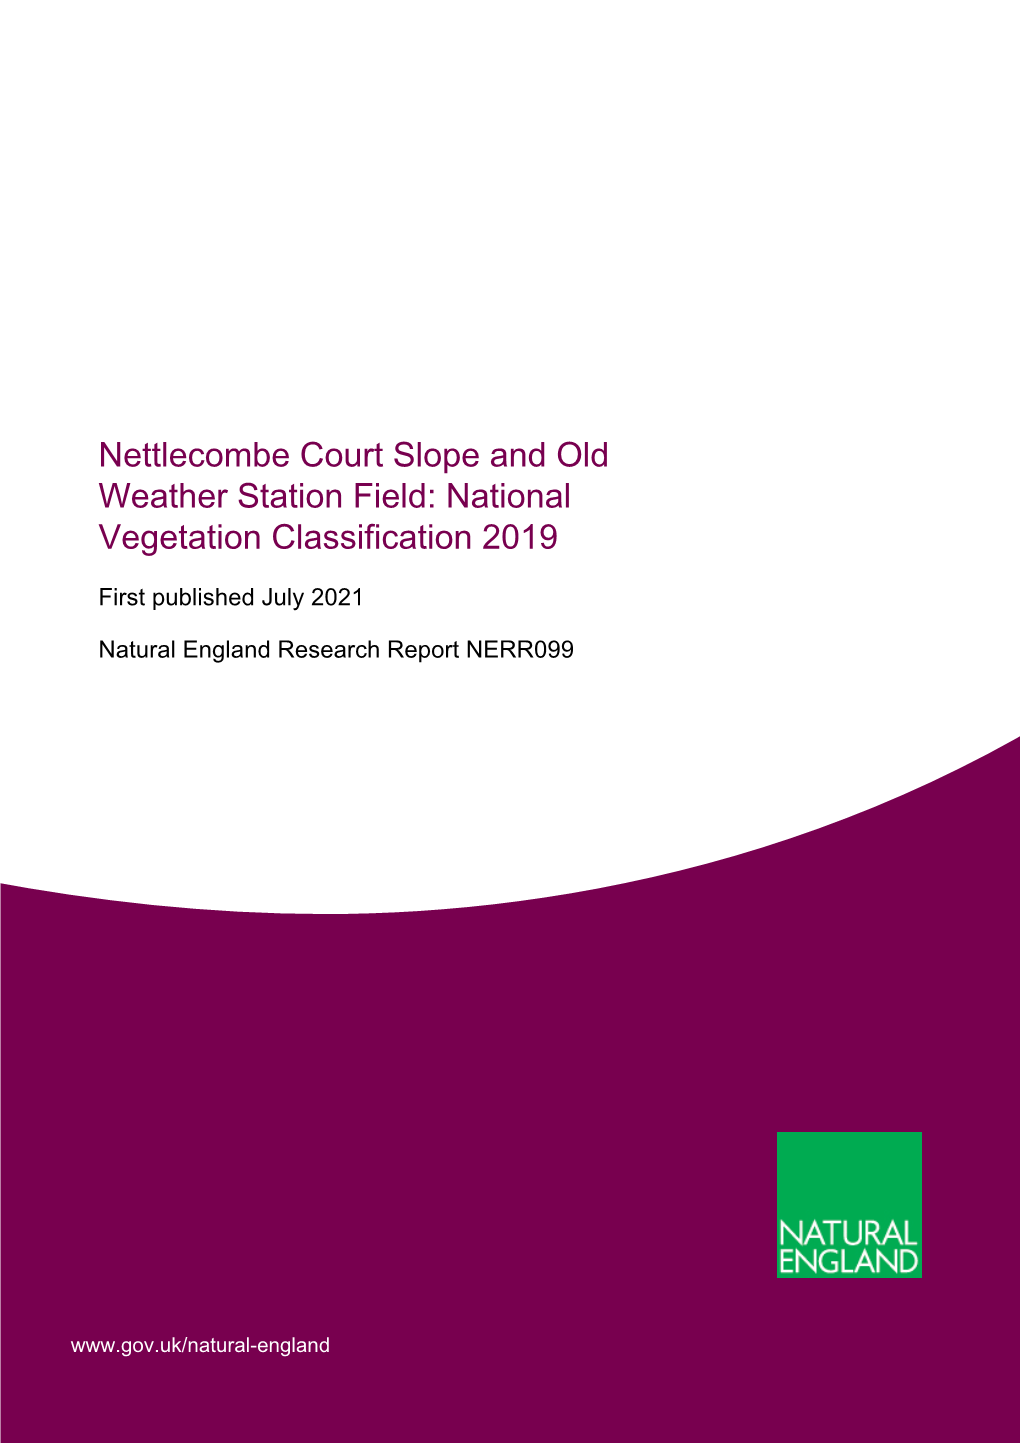 Nettlecombe Court Slope and Old Weather Station Field: National Vegetation Classification 2019